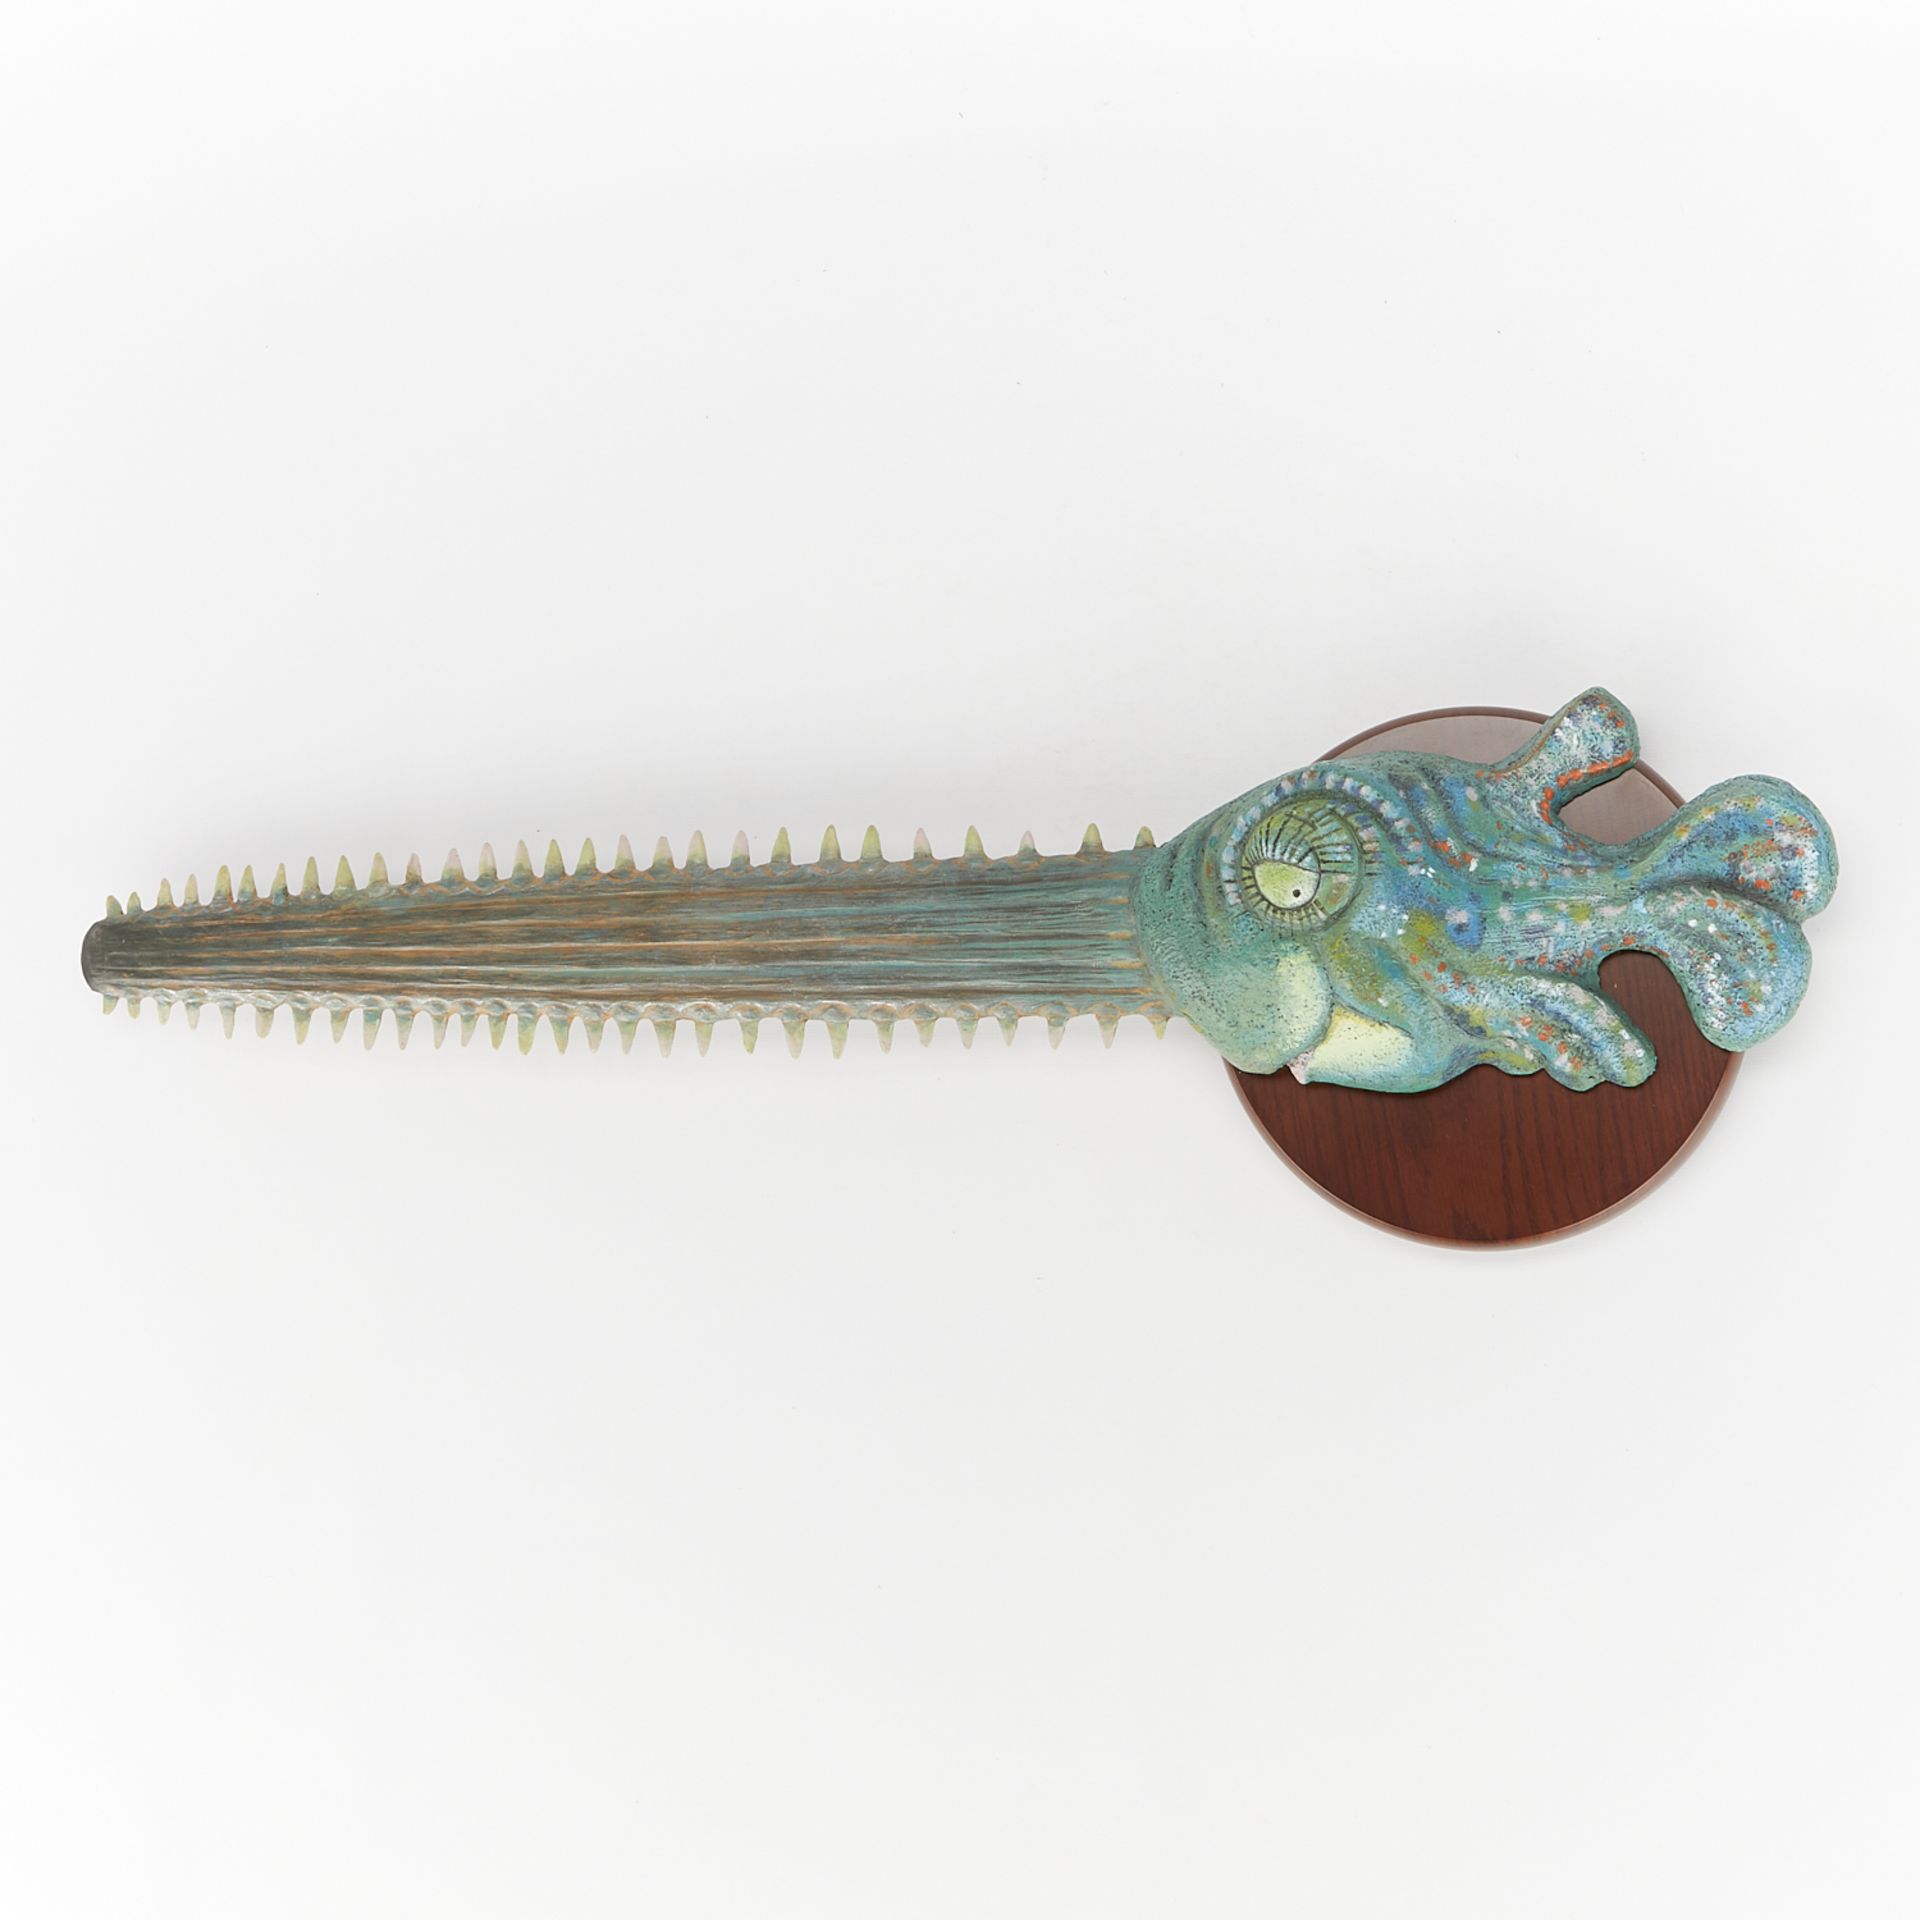 Dr. Seuss "Sawfish" Wall Mount Sculpture - Image 3 of 12